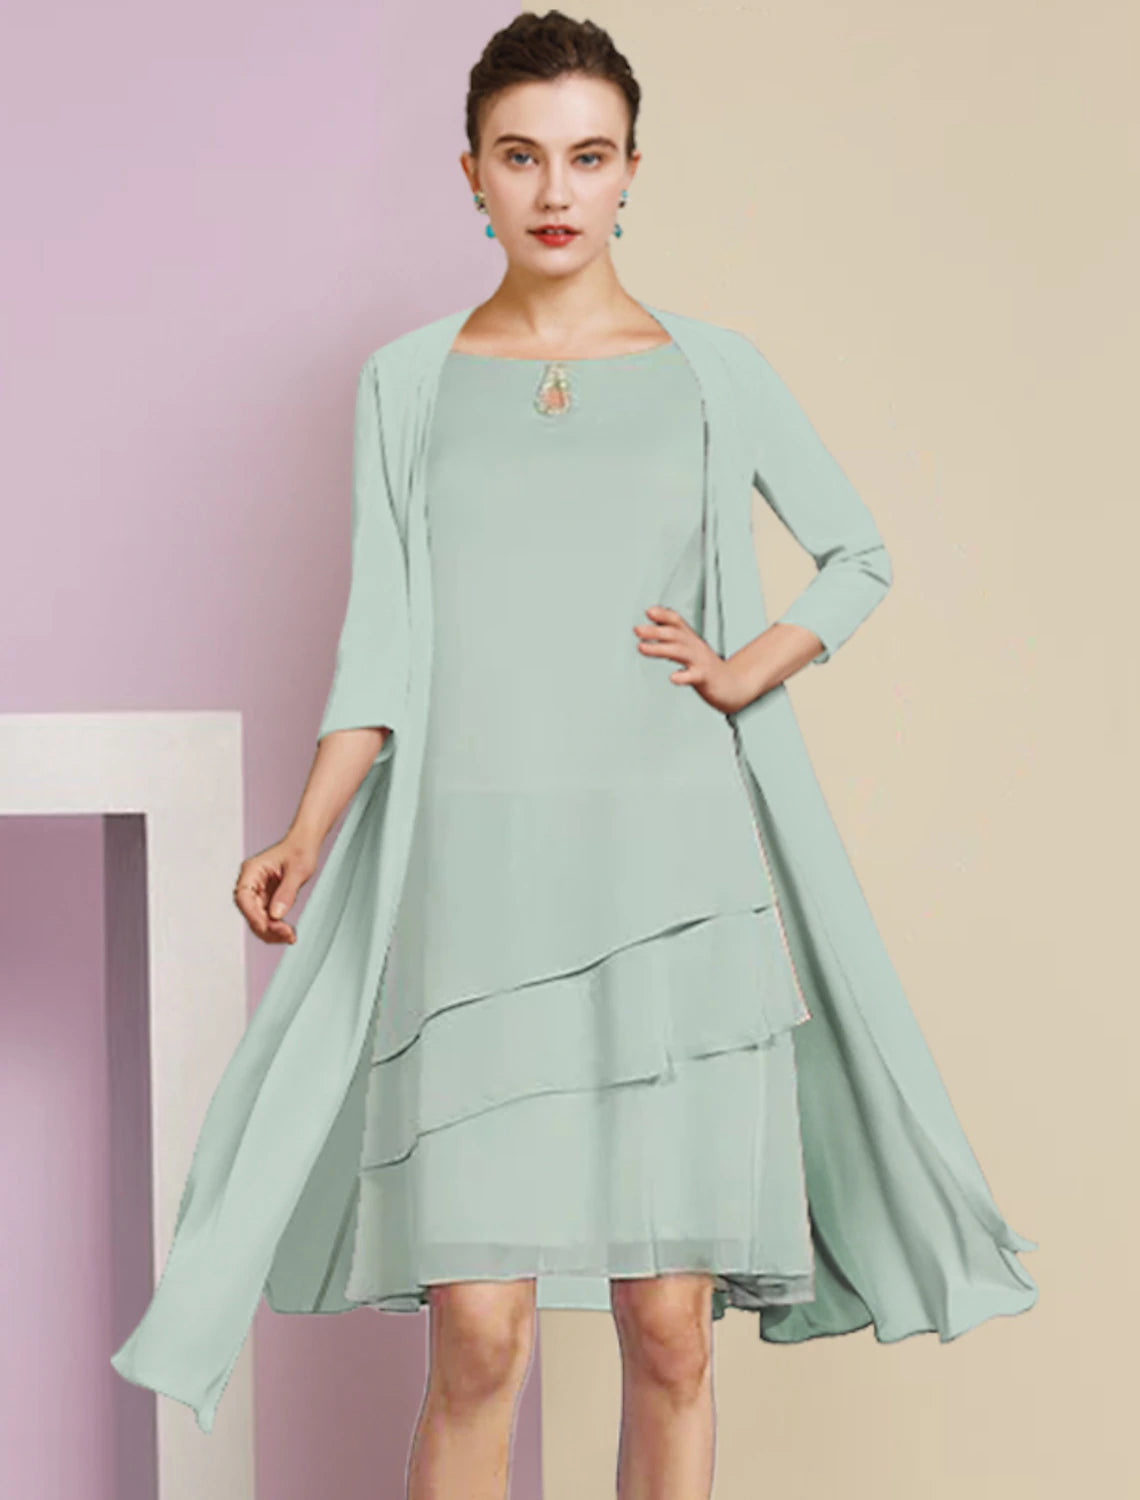 Wholesa  Two Piece A-Line Mother of the Bride Dress Formal Wedding Guest Elegant Scoop Neck Knee Length Chiffon 3/4 Length Sleeve with Tier